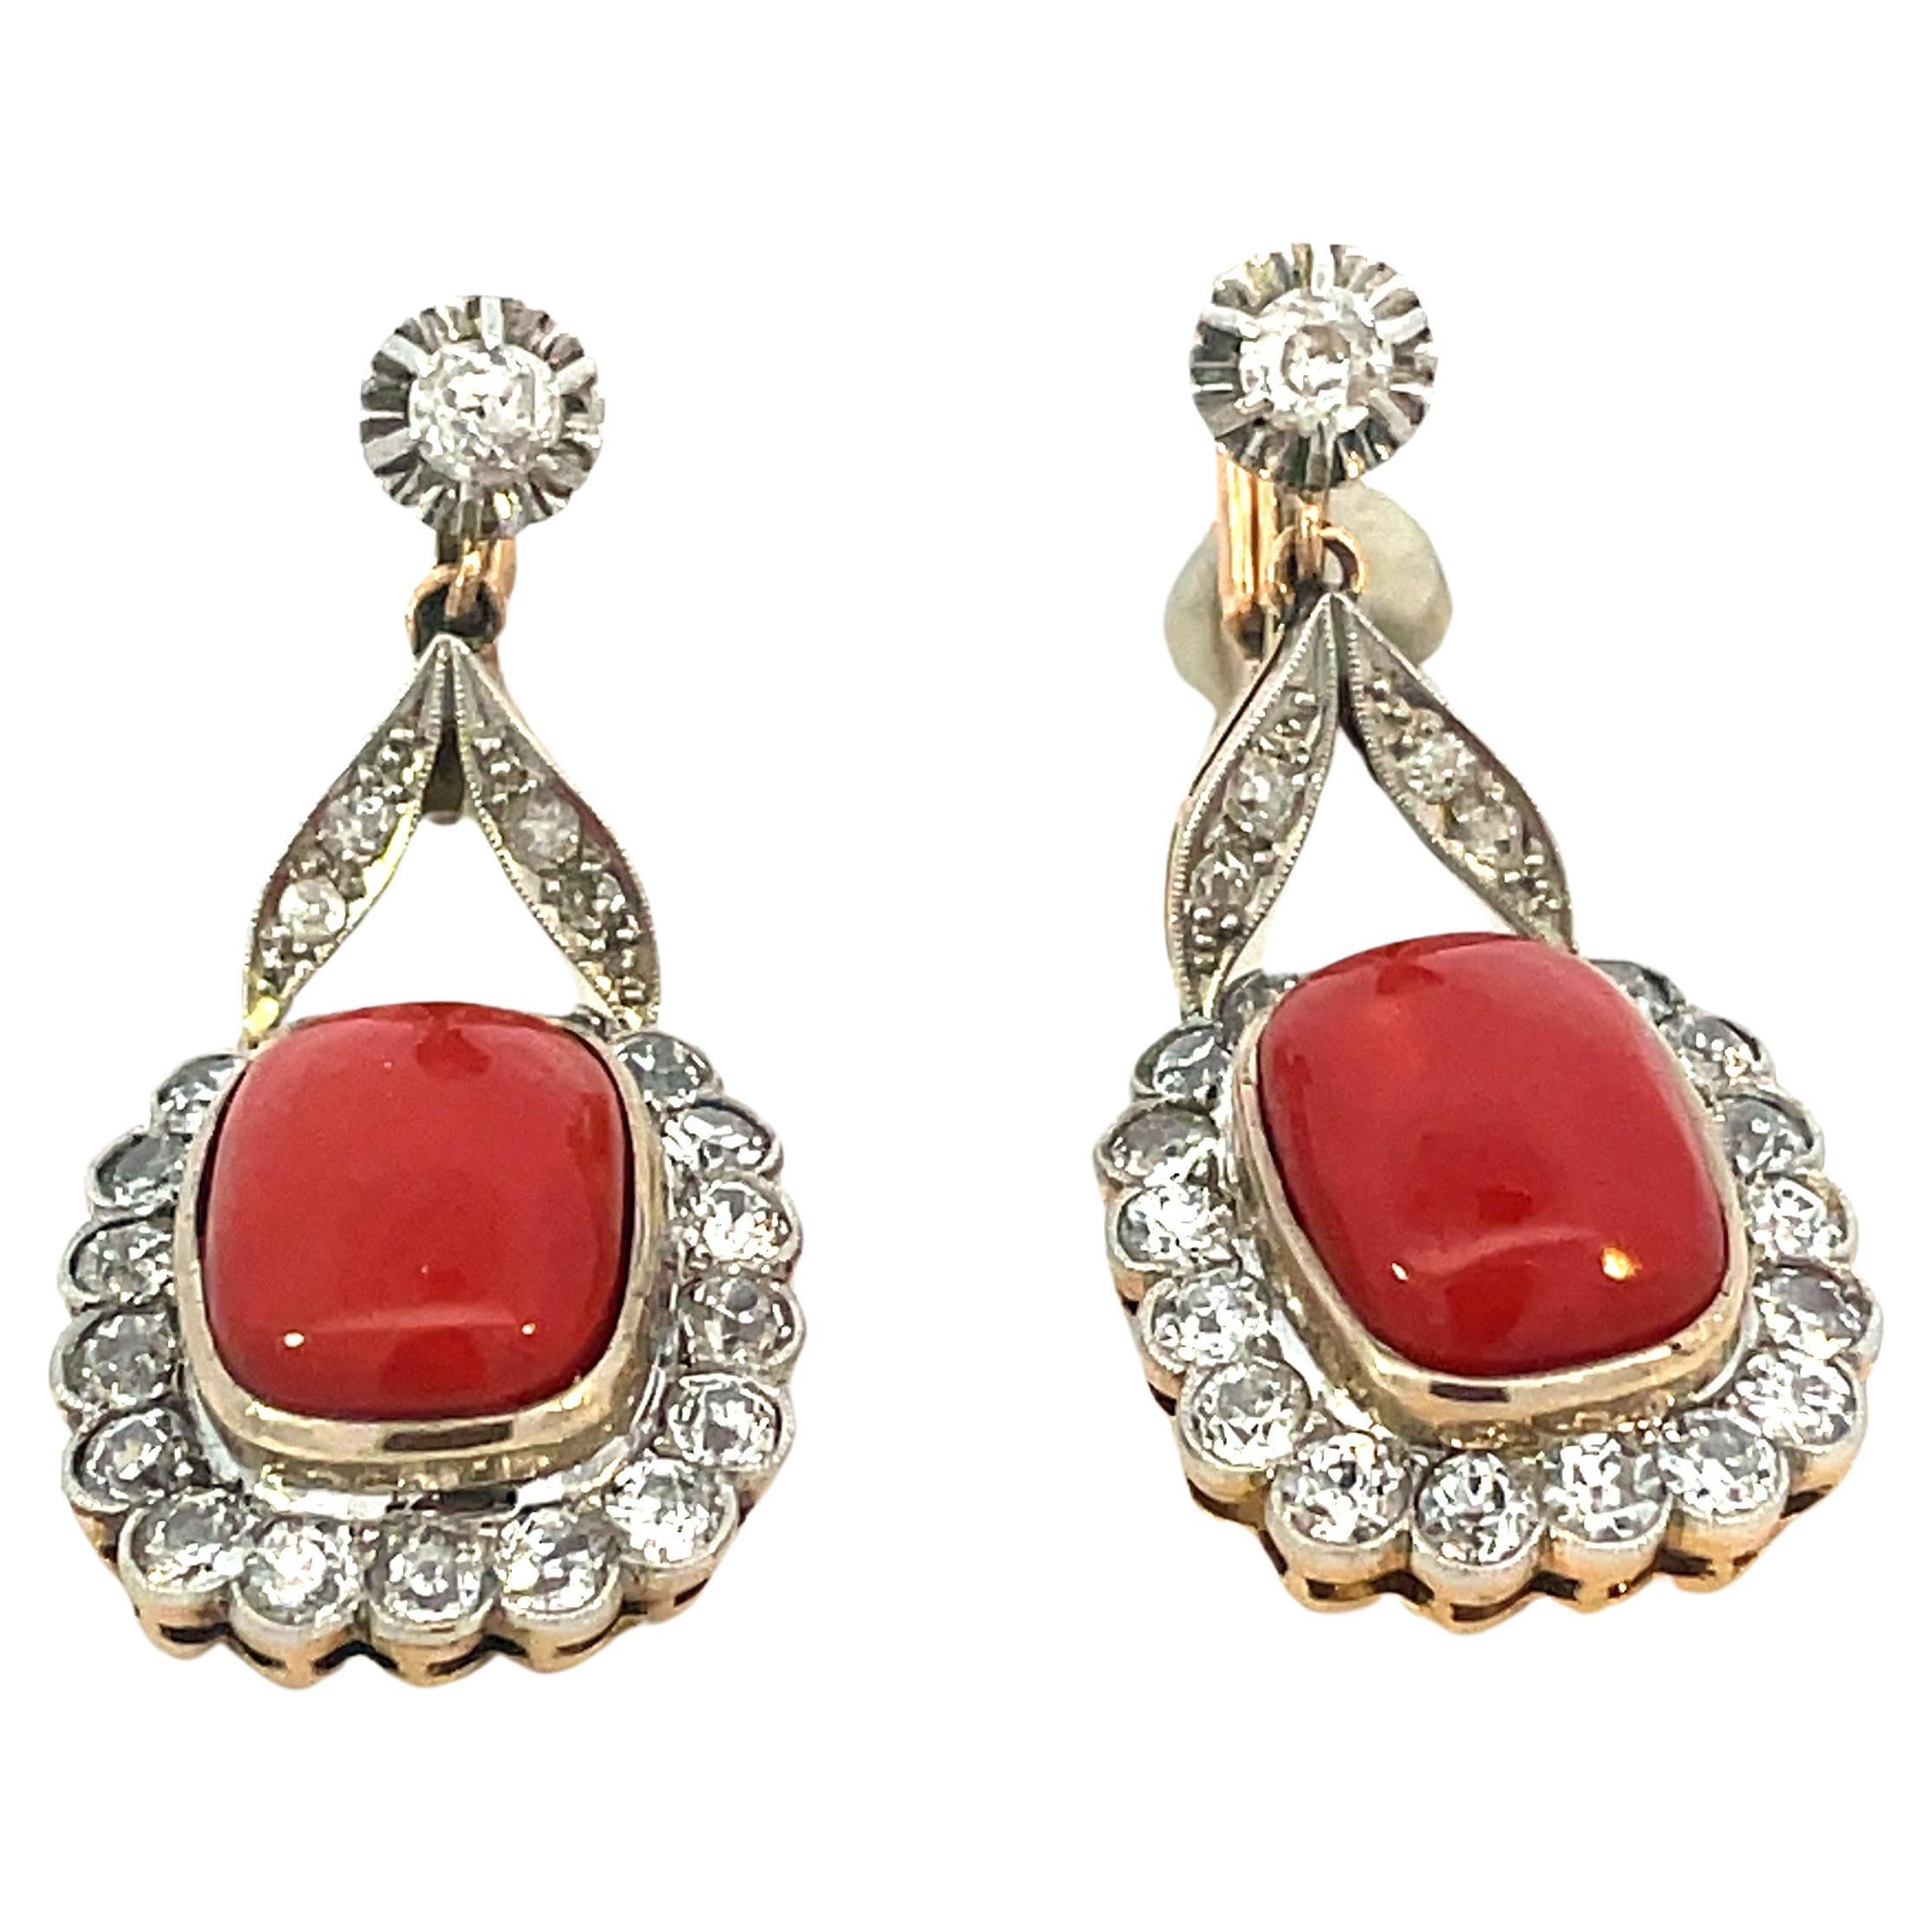 Pretty pair of Edwardian Earrings with 2 orange natural coral encrusted by 3 cts of round brilliant diamonds mounted in platinum and 18kt gold.

